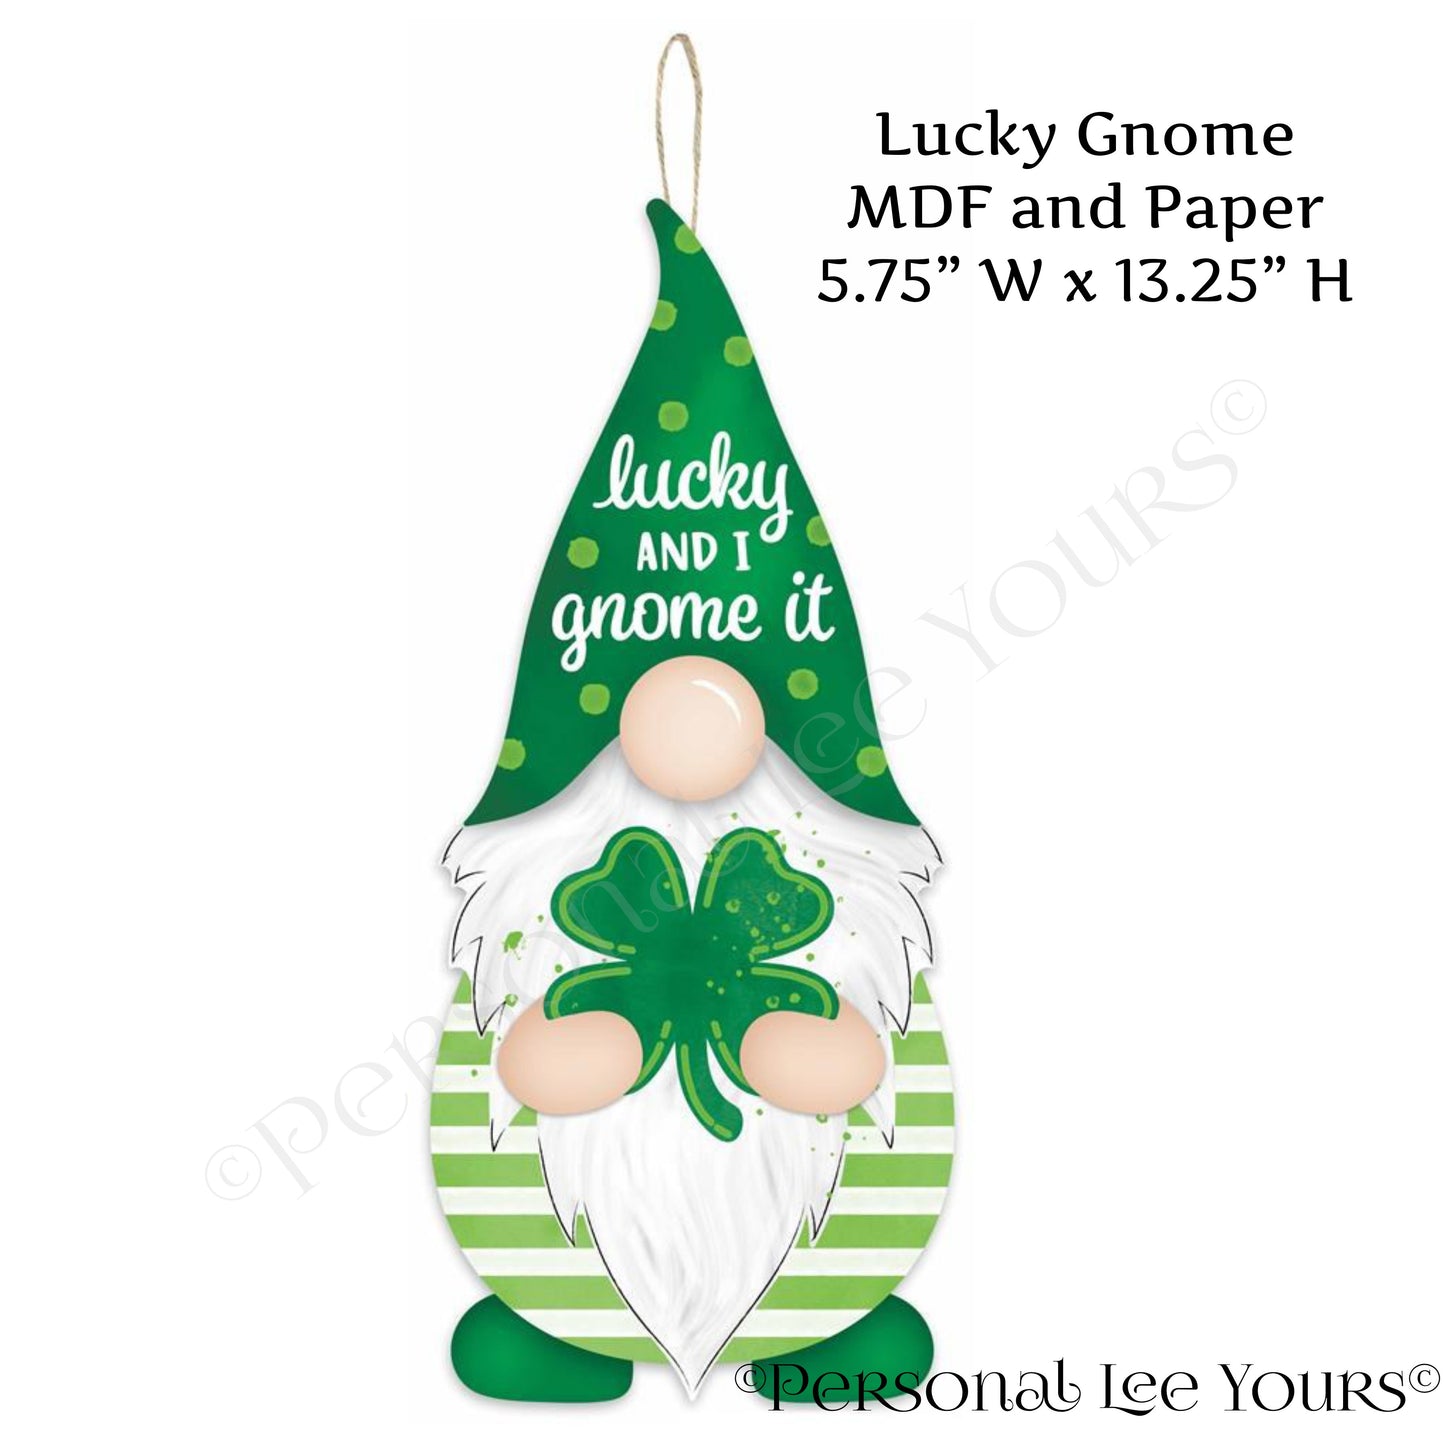 Wreath Accent * Lucky Gnome * 13.25" H  x  5.75" W * Lightweight * MDF and Paper * AP7162